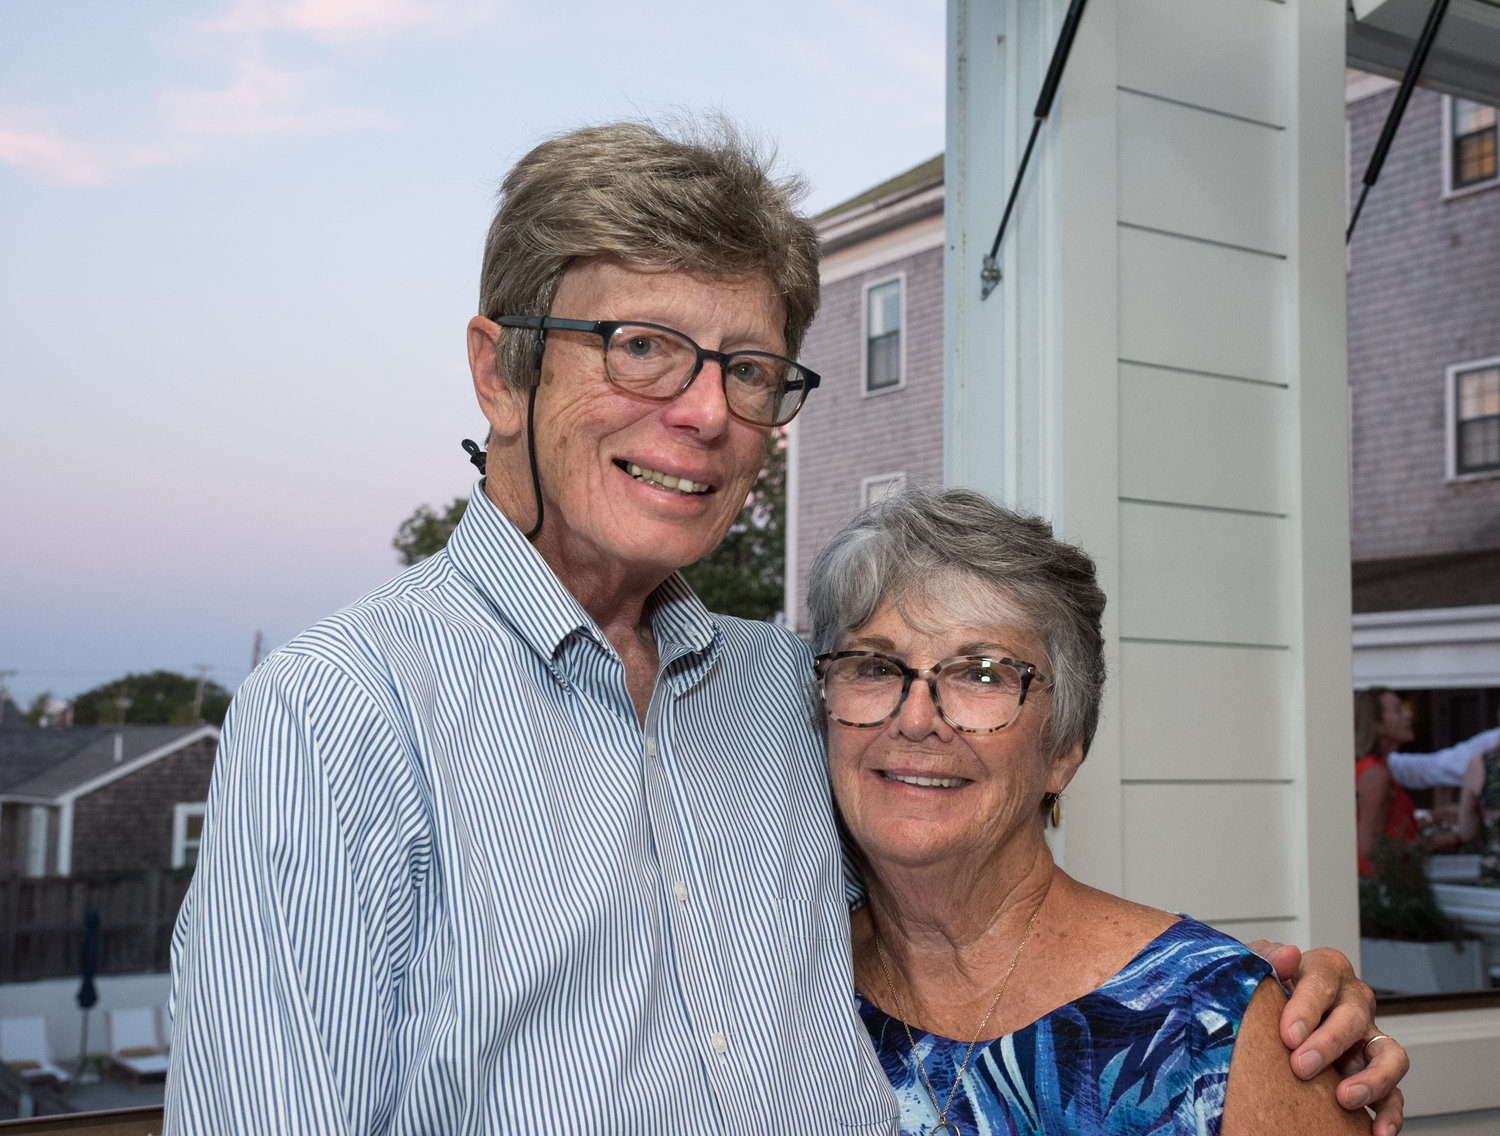 Bill and Kathy Grieder